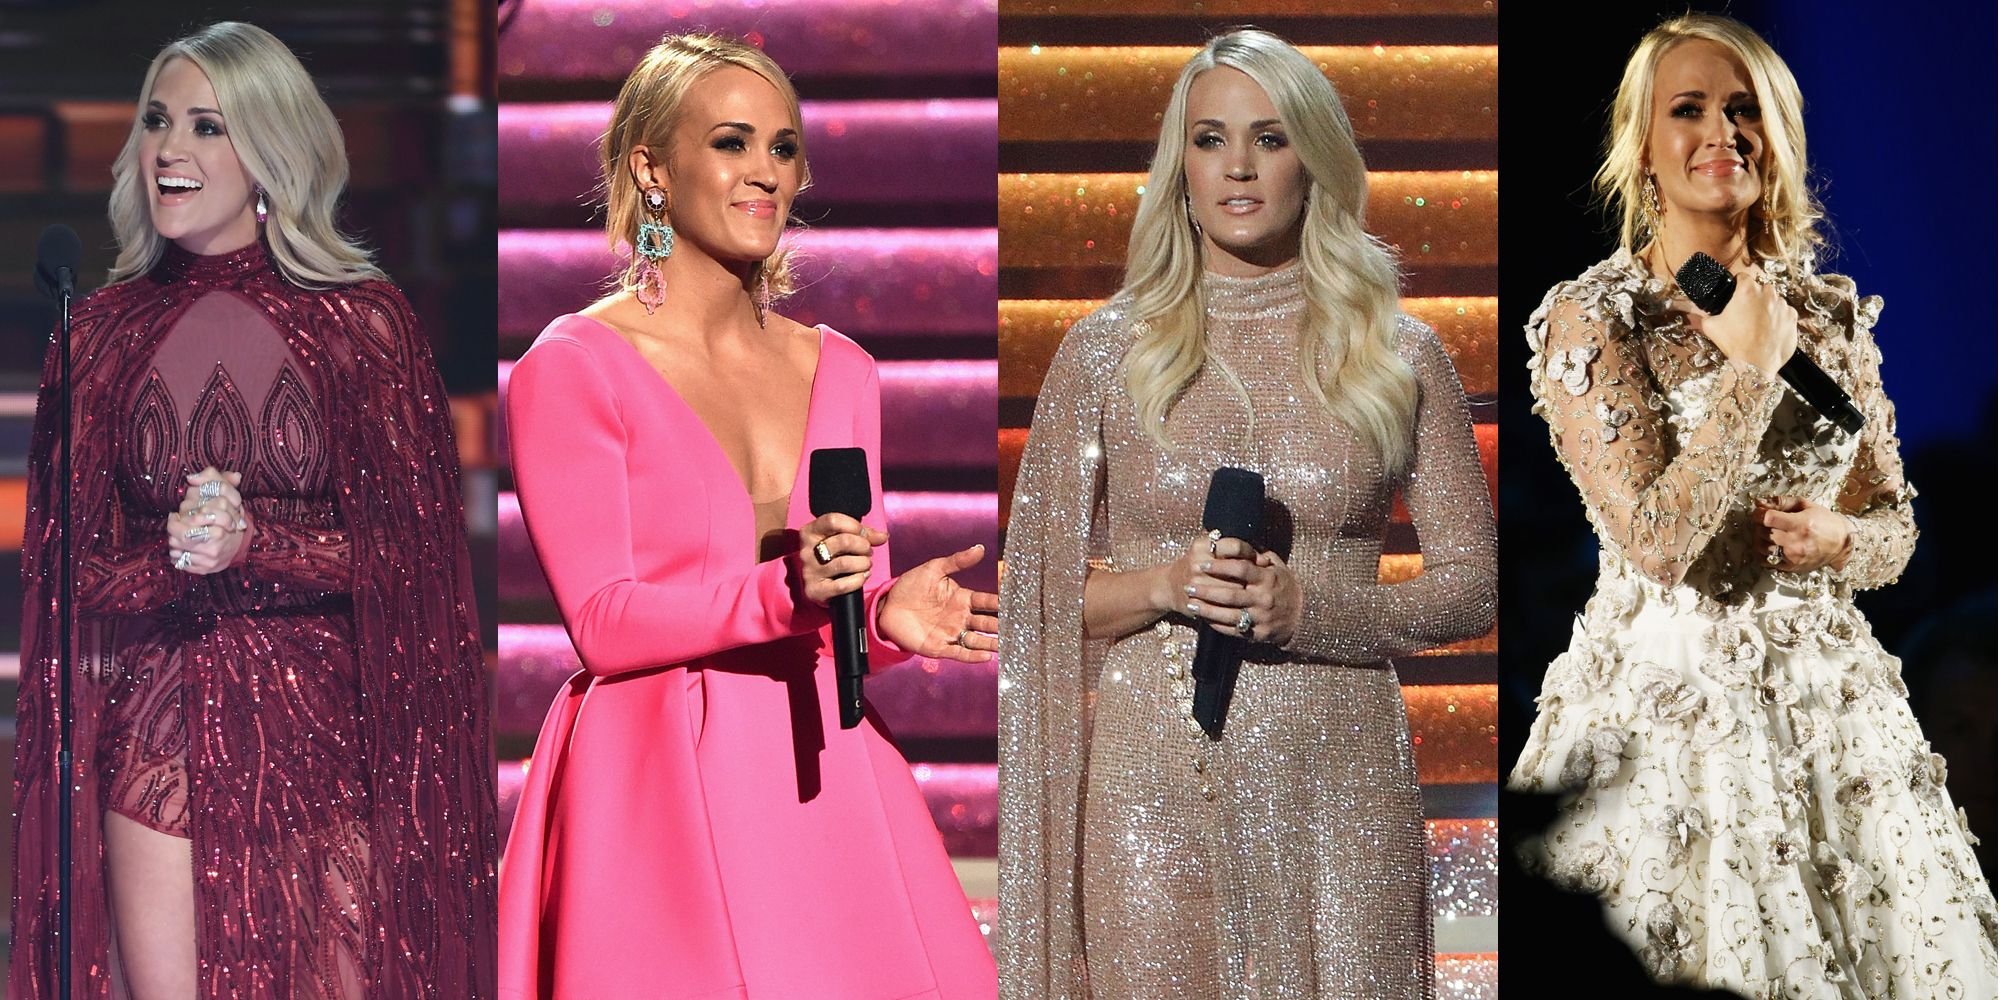 Carrie Underwood Fans Gush Over Country Star's Glamorous Elf Costume